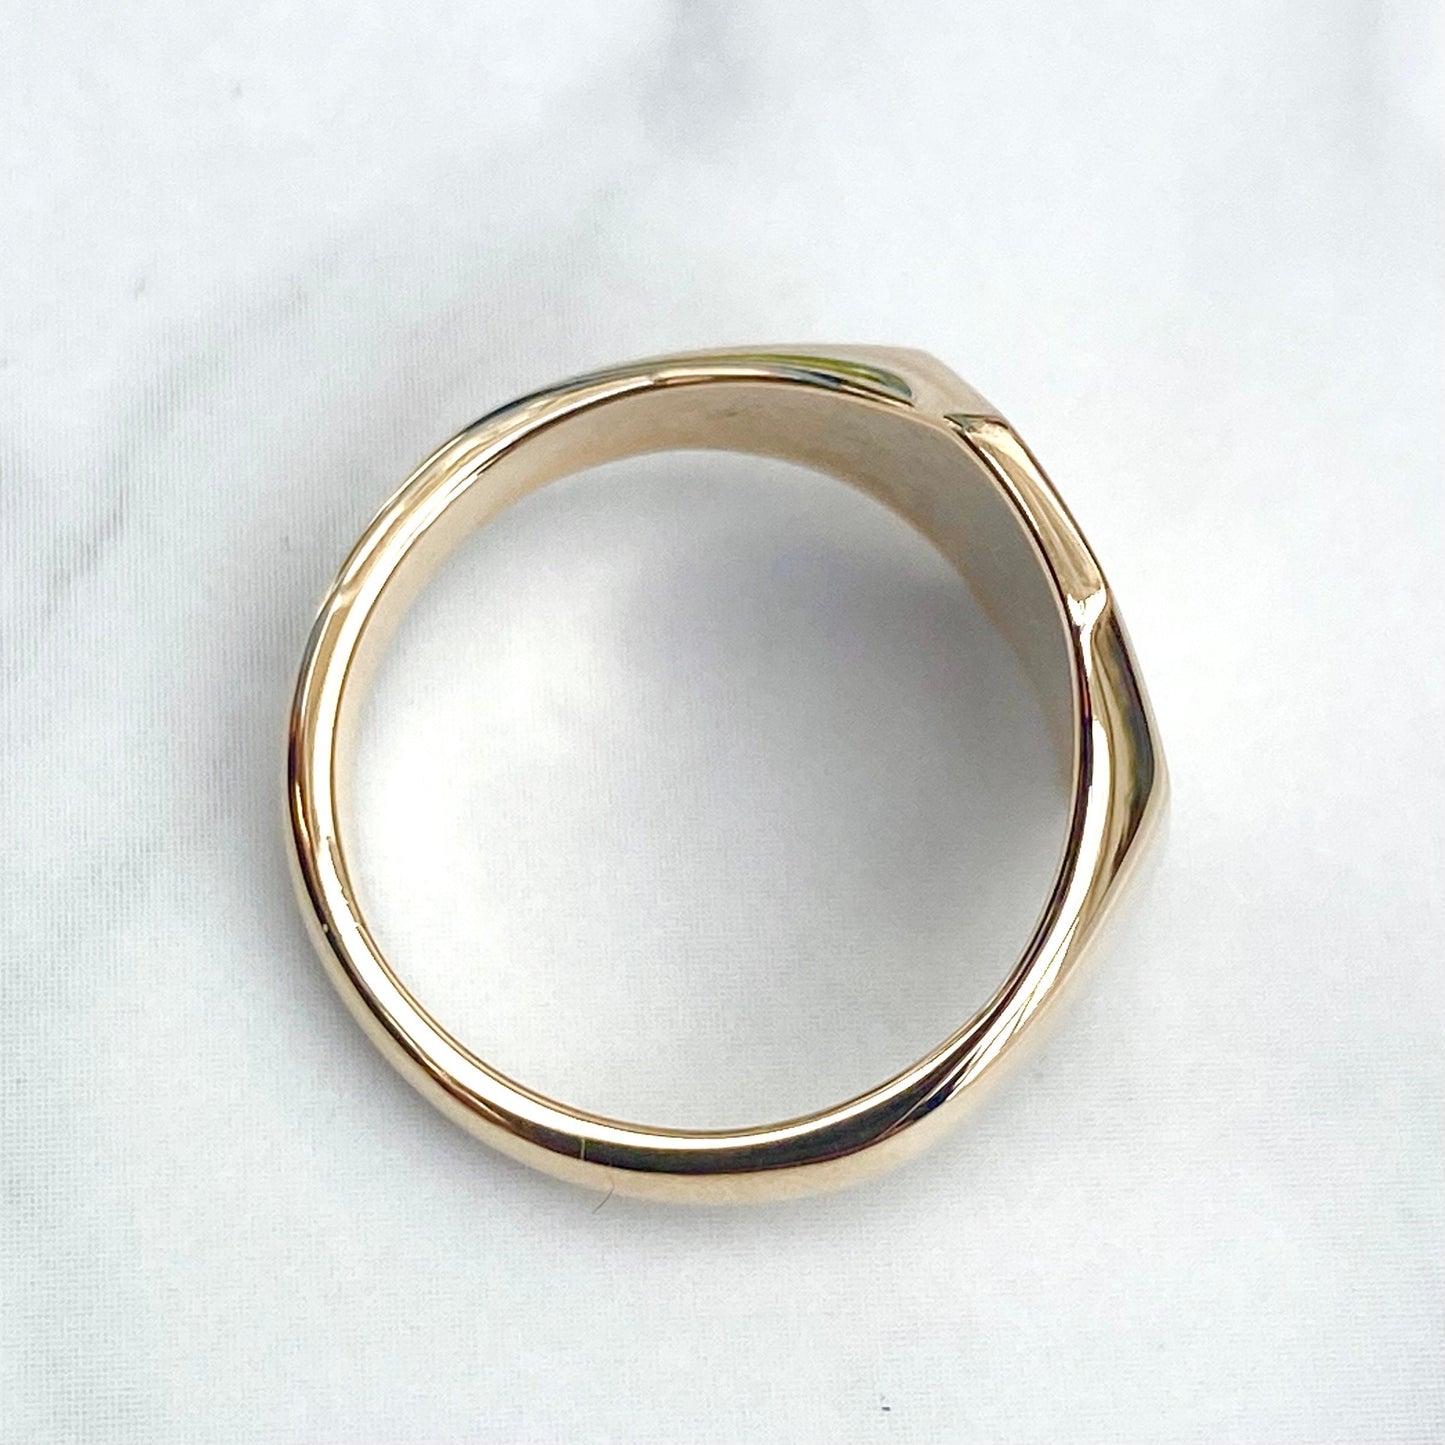 Vintage 9ct yellow gold octagonal signet ring - Can be hand engraved - UK size N 1/2 - US size 7 - British vintage jewellery